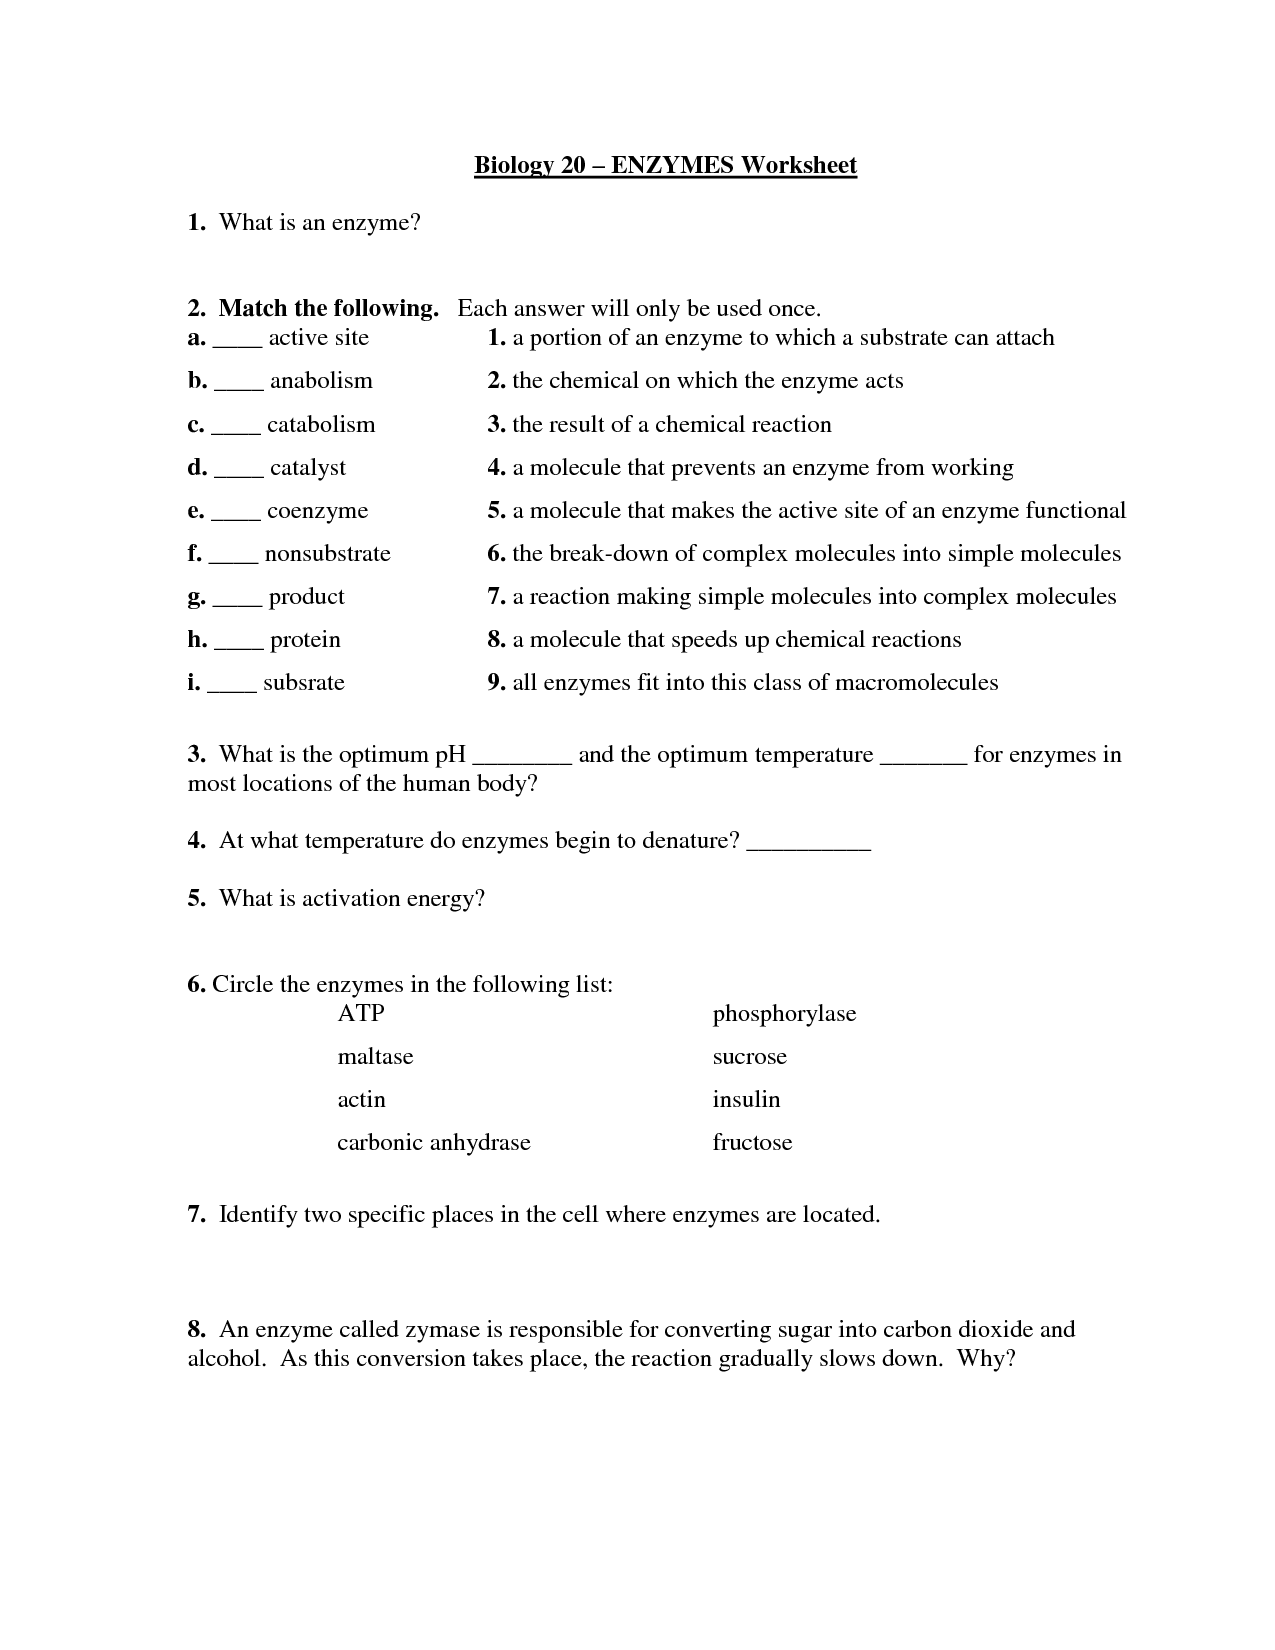 20 Best Images of Enzymes And Chemical Reactions Worksheet  Chemical Reactions and Enzymes 